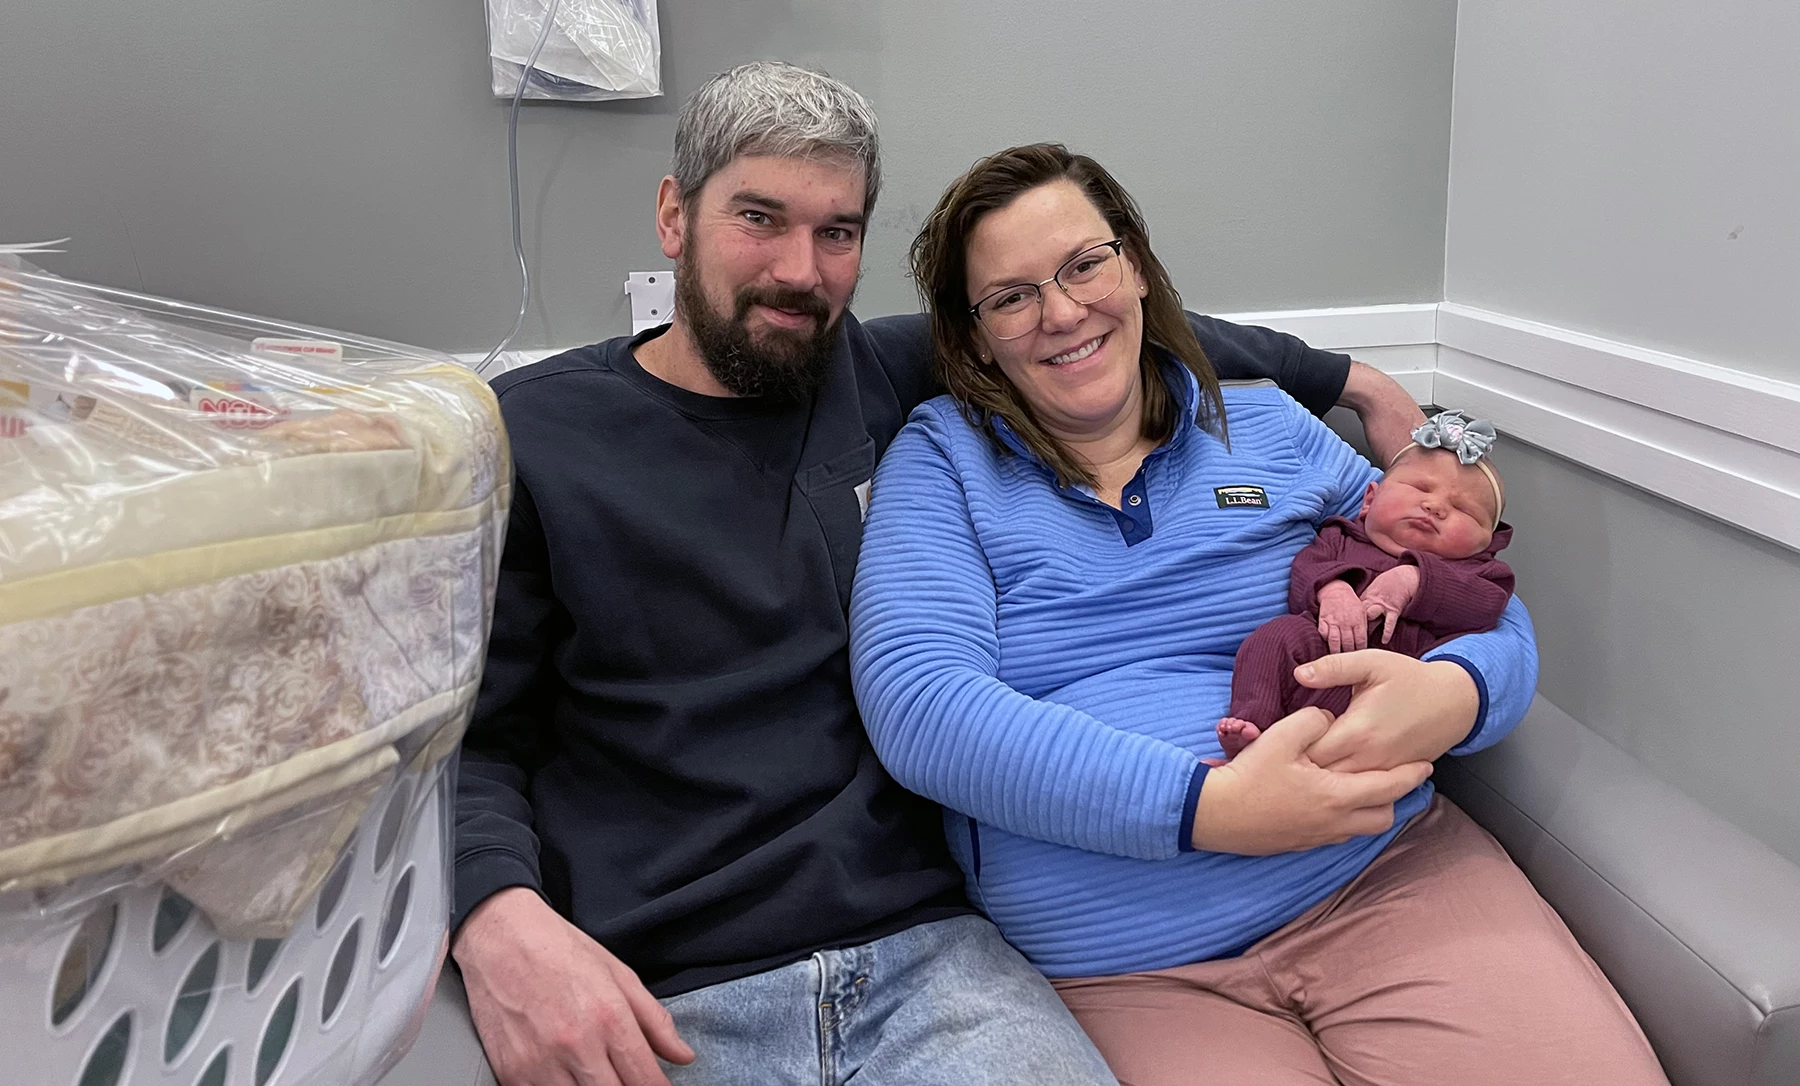 A.R. Gould Hospital Welcomes First Baby of the New Year